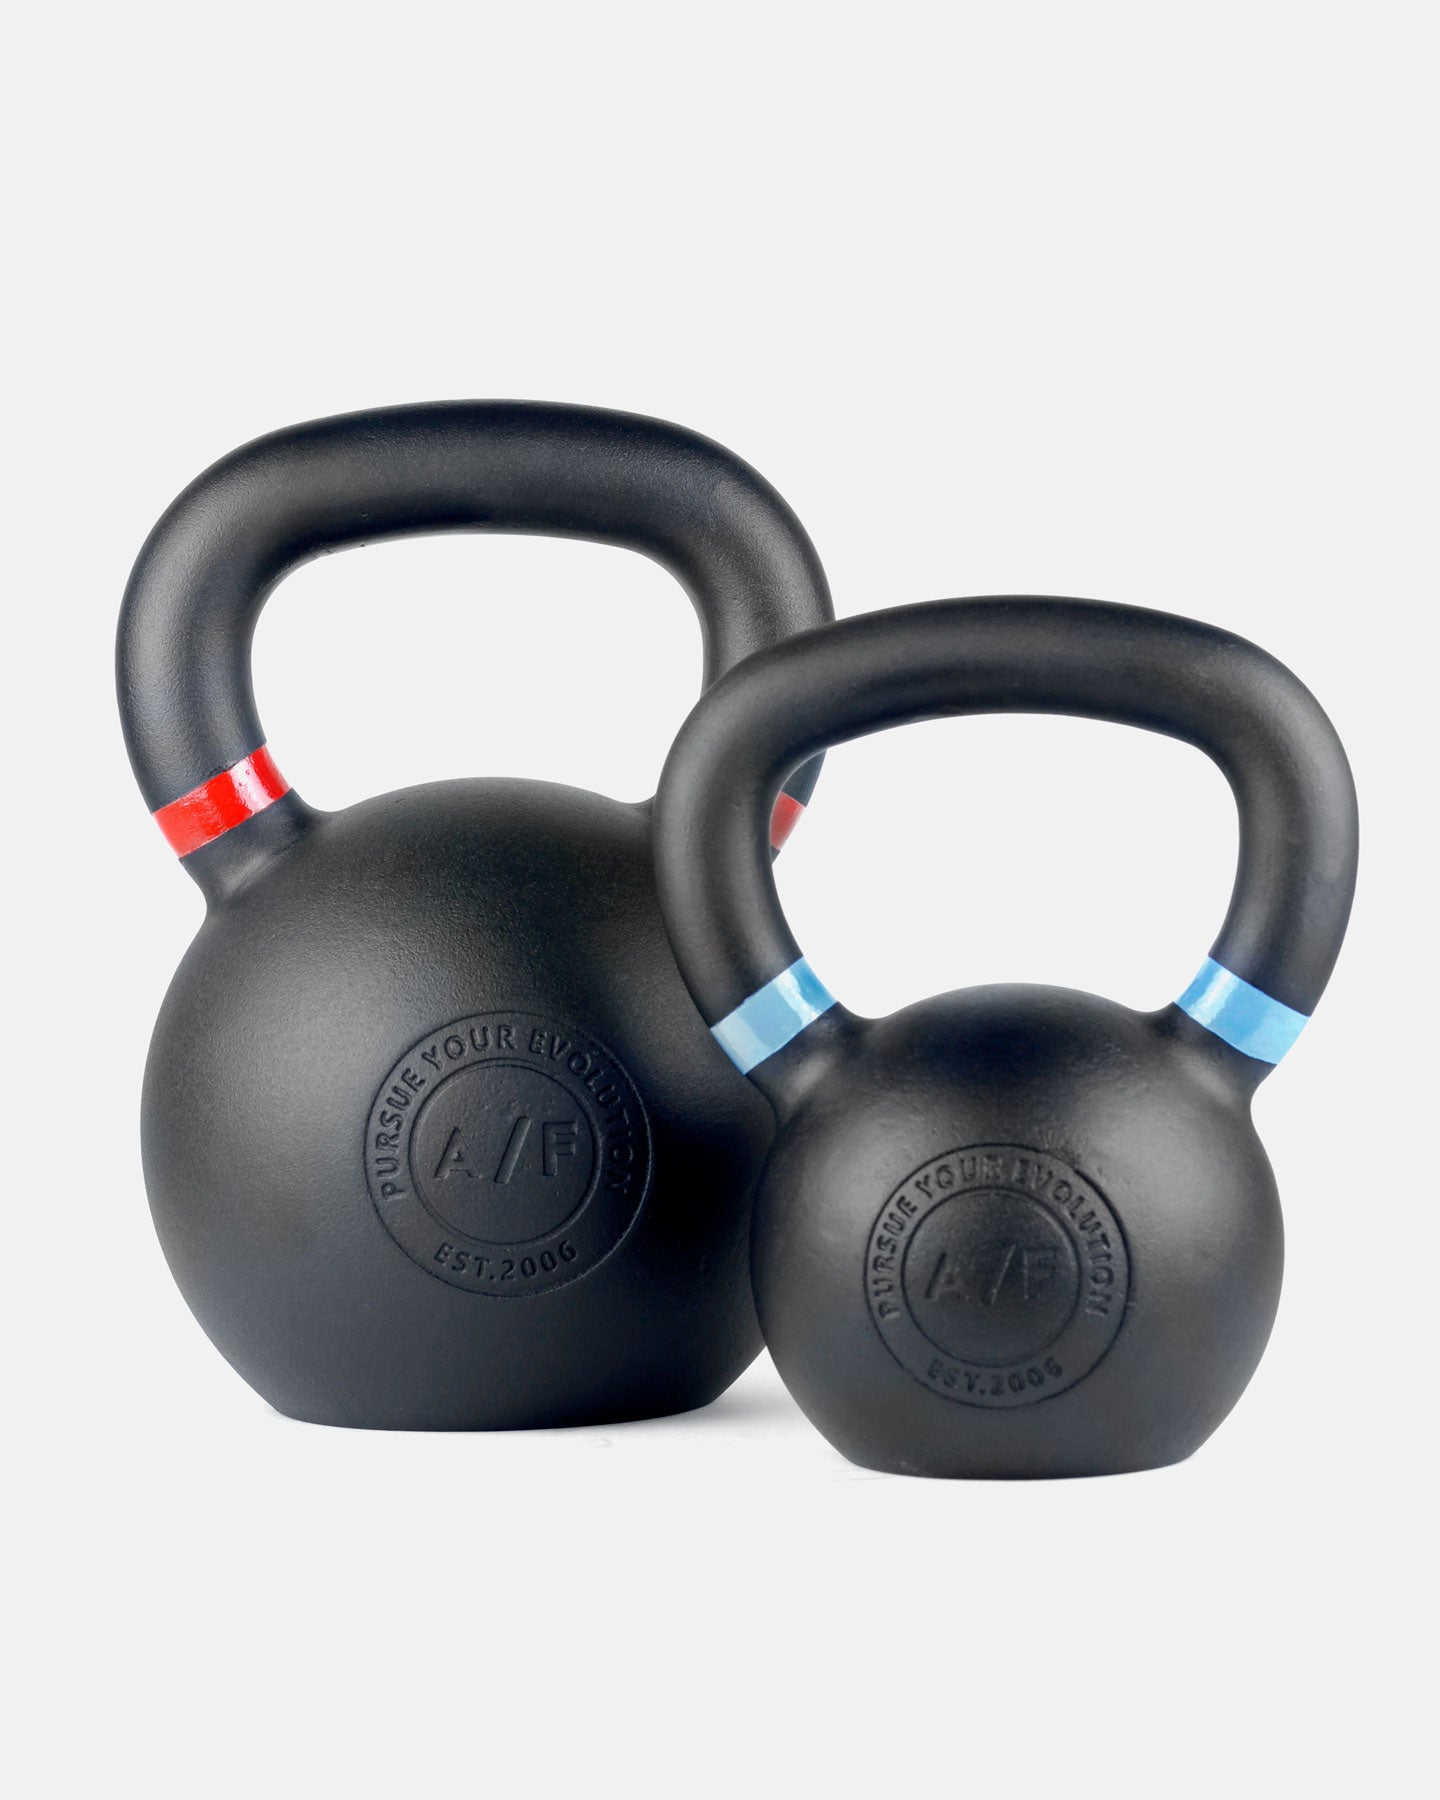 Team Kettlebells - Color-Coded, Cast Iron Bells for Home Gym